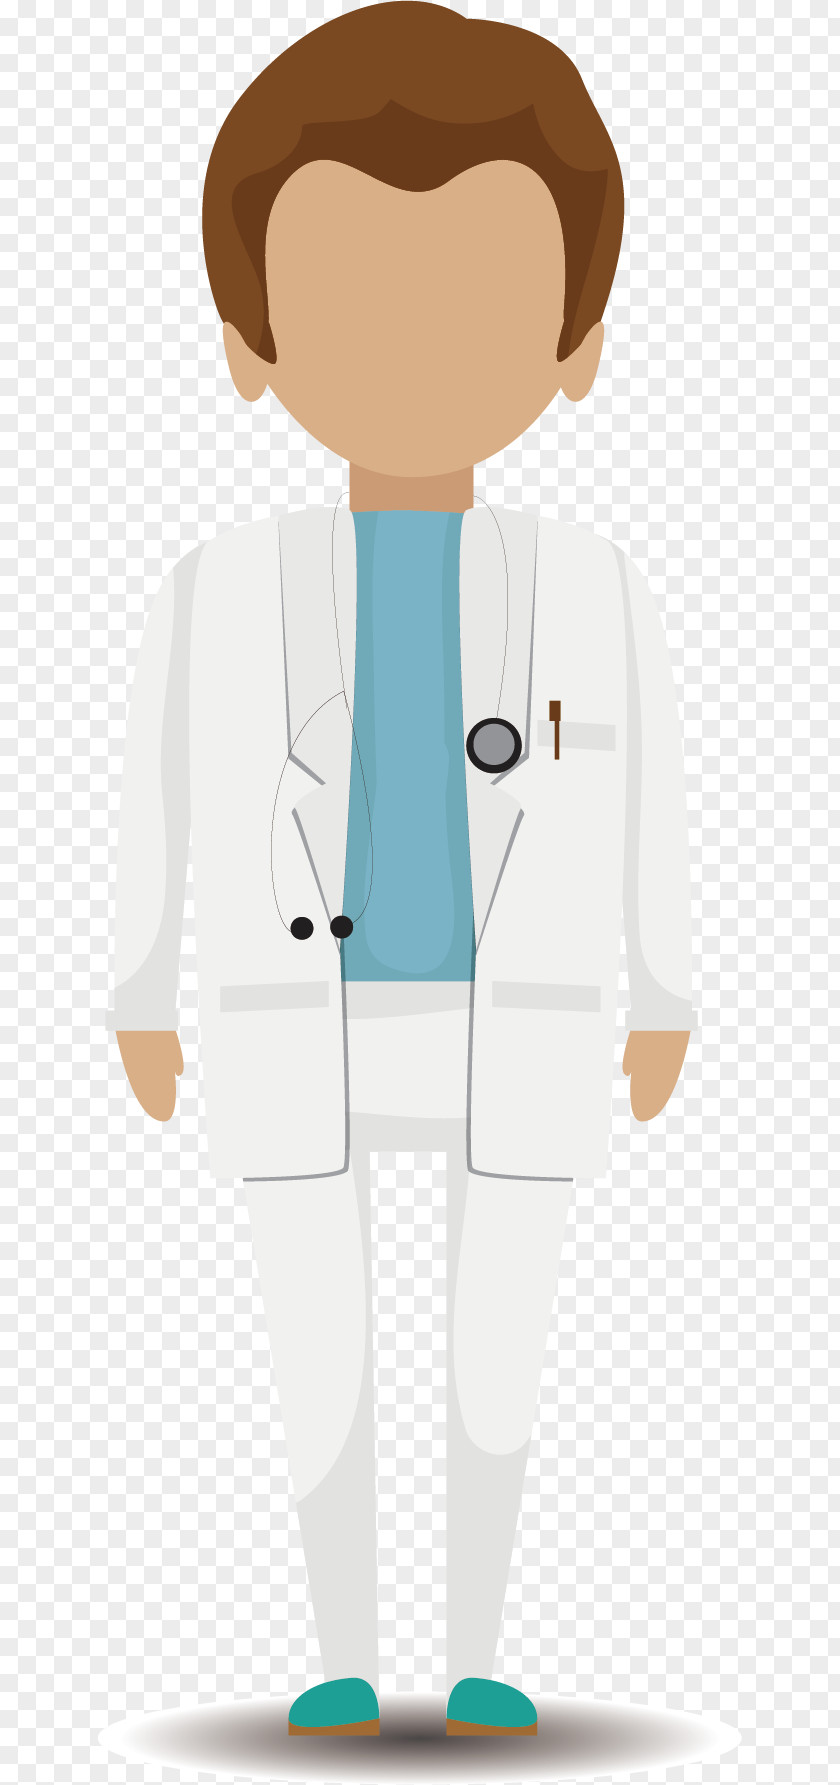 Doctor Head Physician Illustration PNG